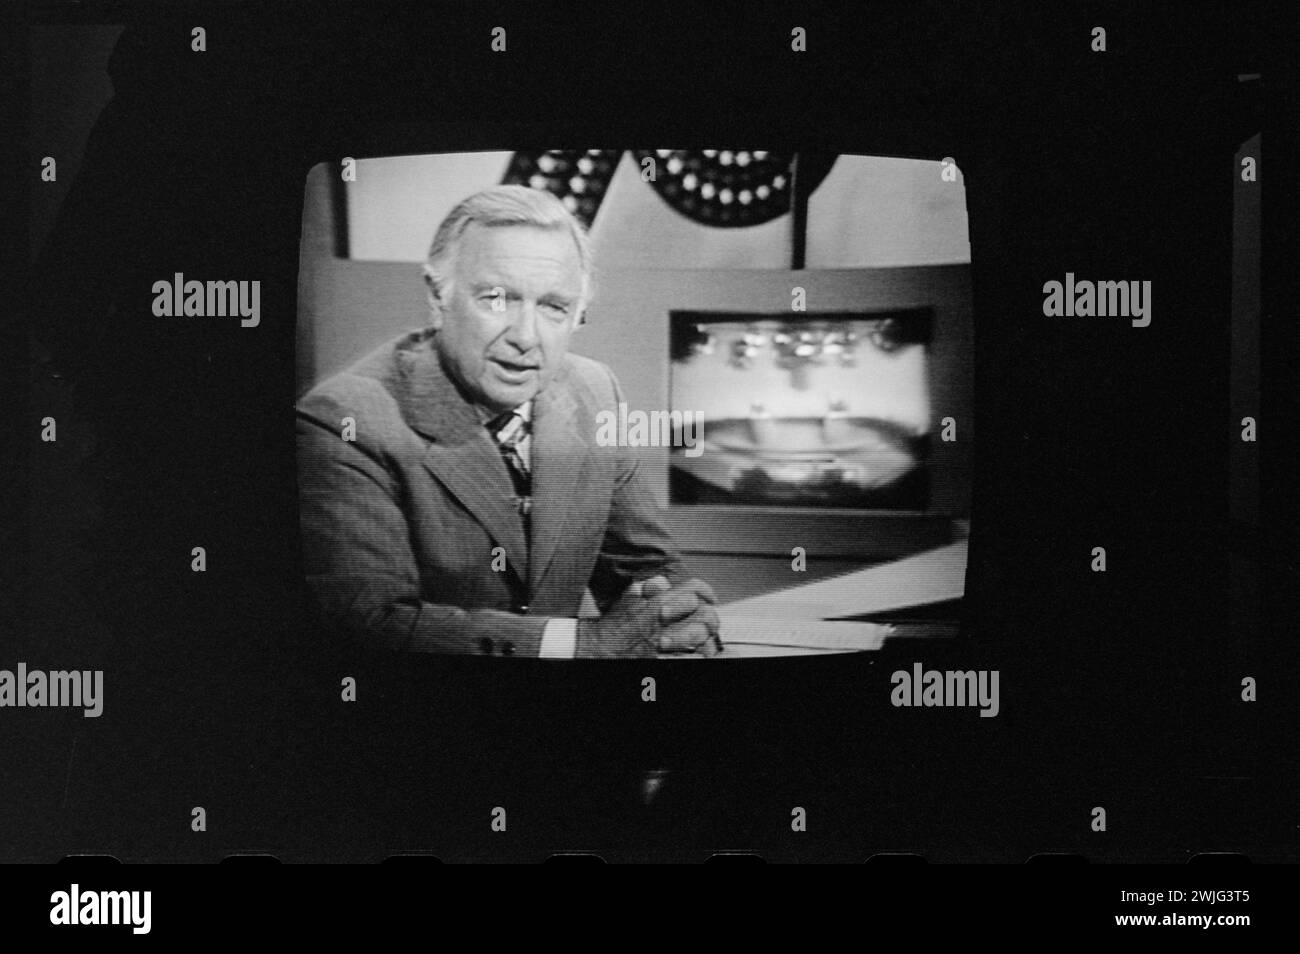 Walter Cronkite on television during the first presidential debate between Ford and Carter, Philadelphia, Pennsylvania, 9/23/1976. (Photo by Thomas O'Halloran/US News and World Report Magazine Collection) Stock Photo